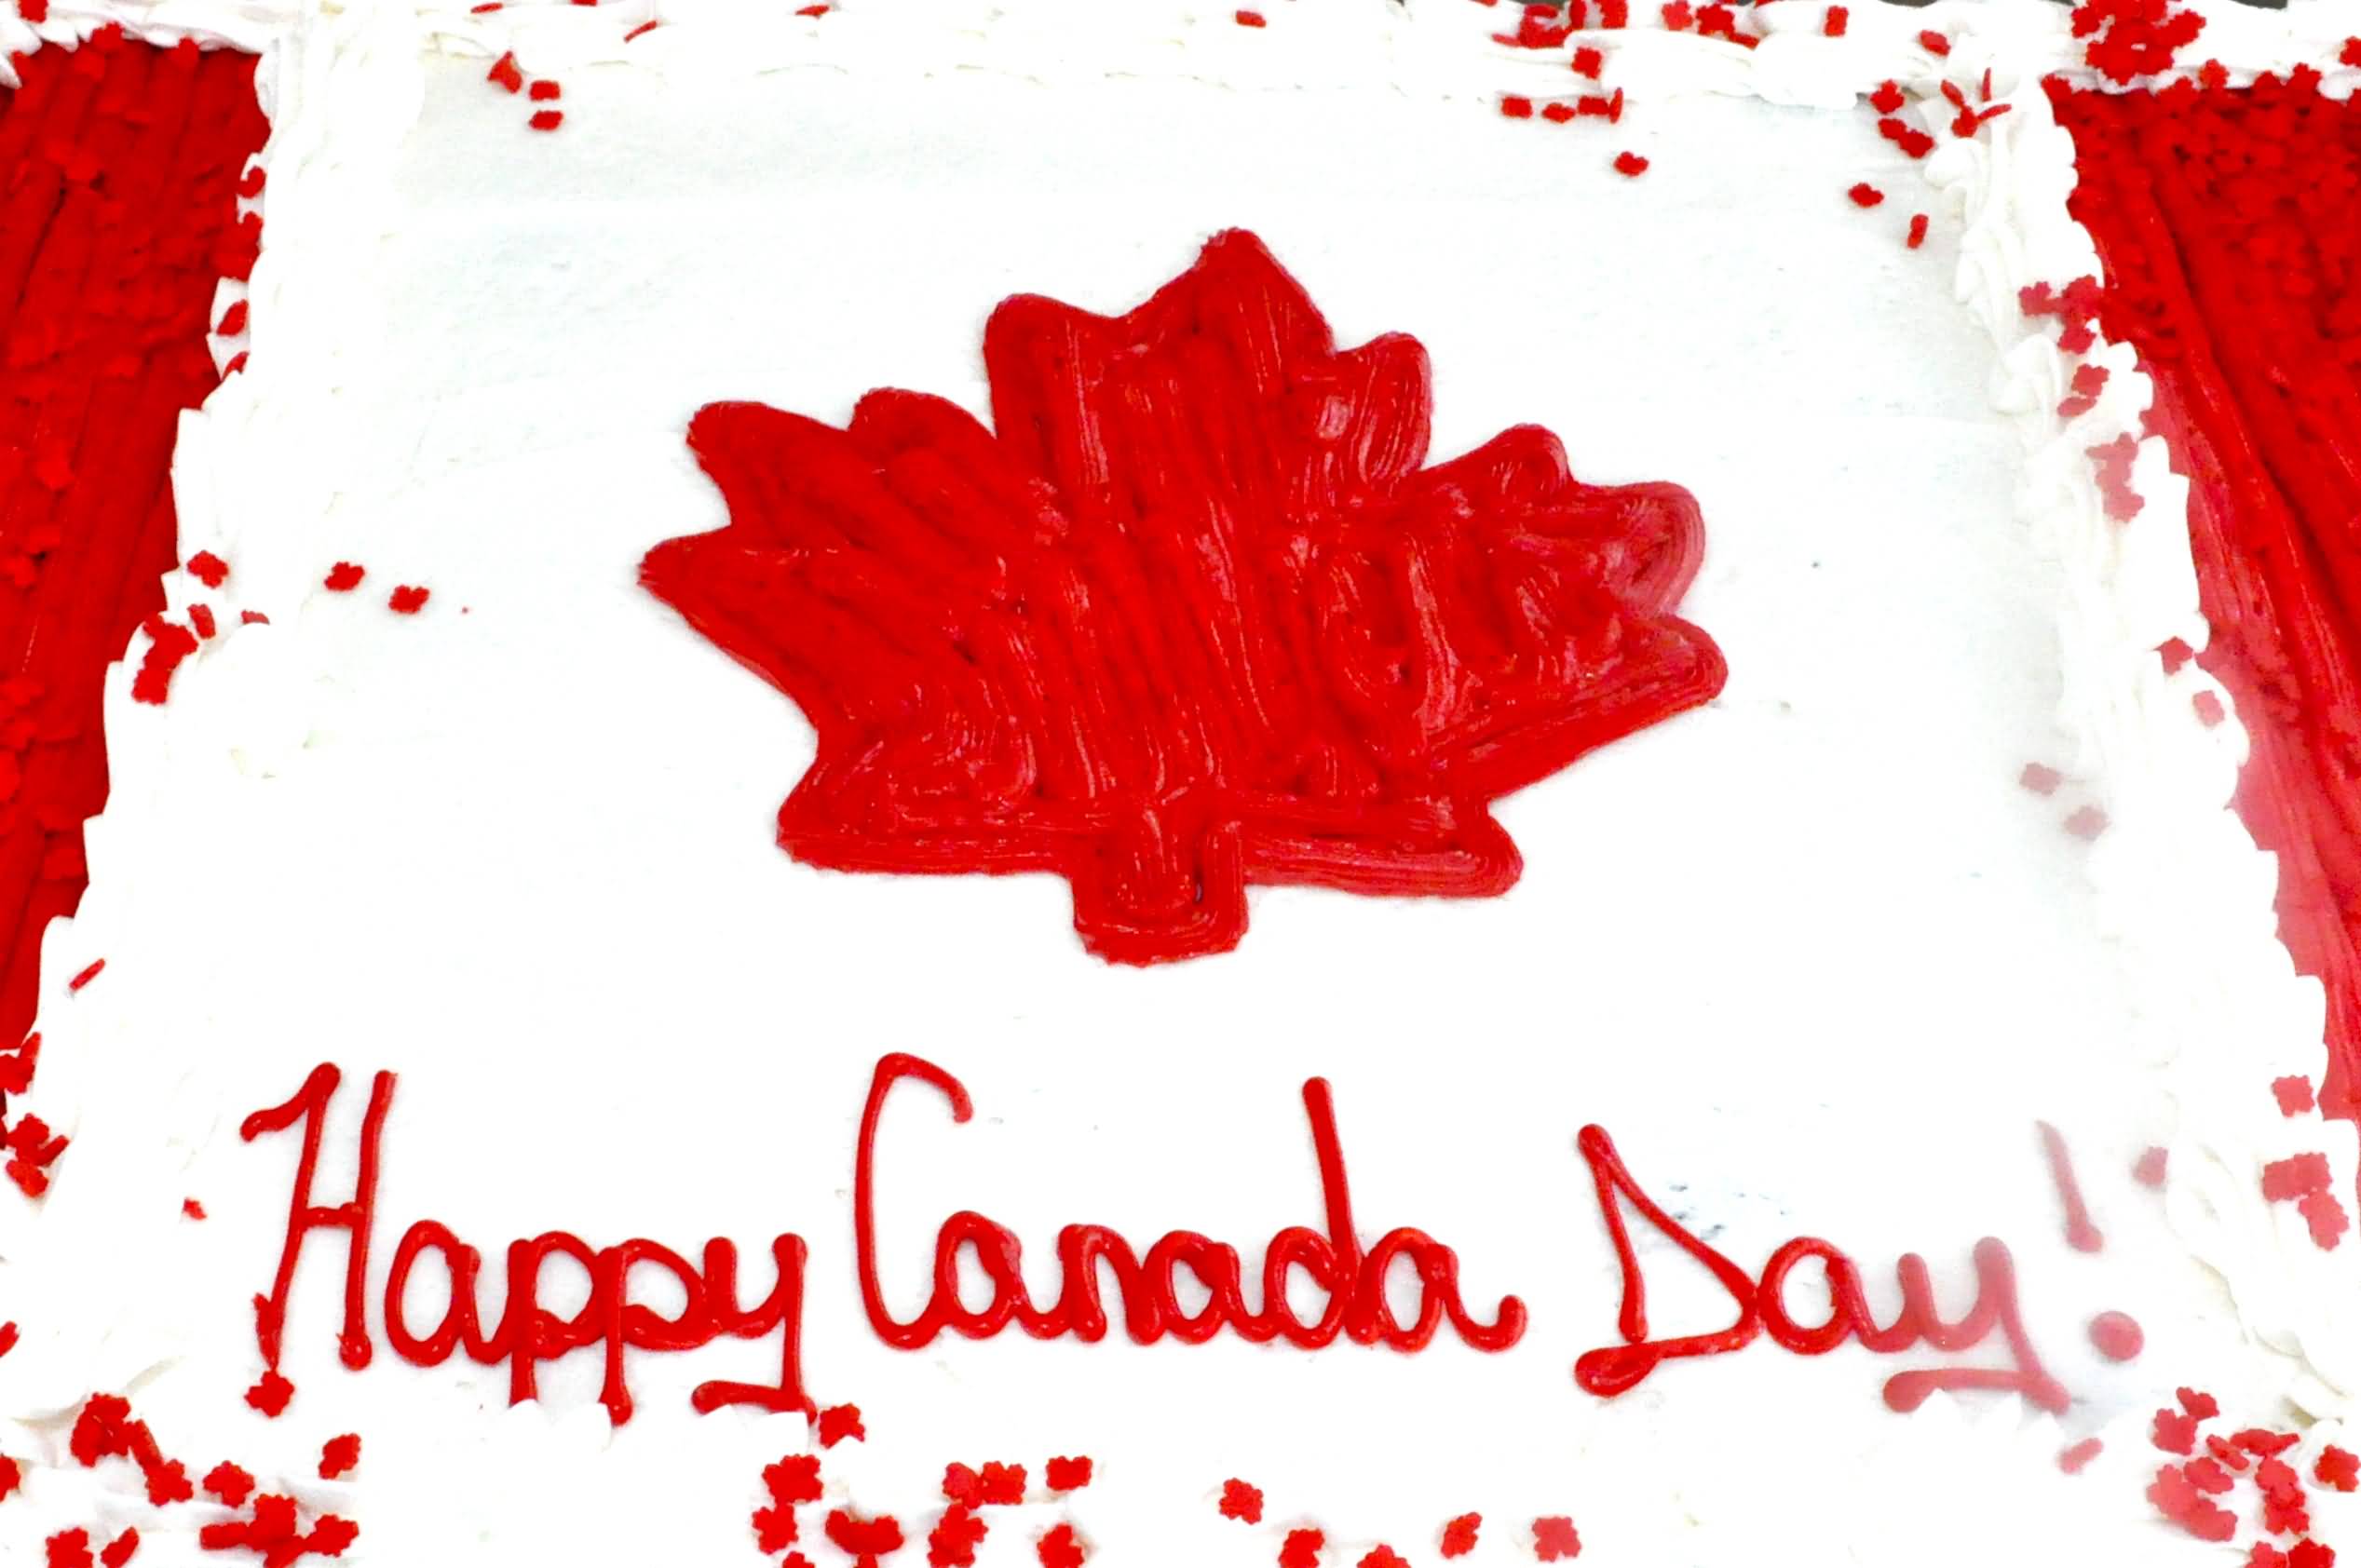 Happy Canada Day E-card Wishes Image